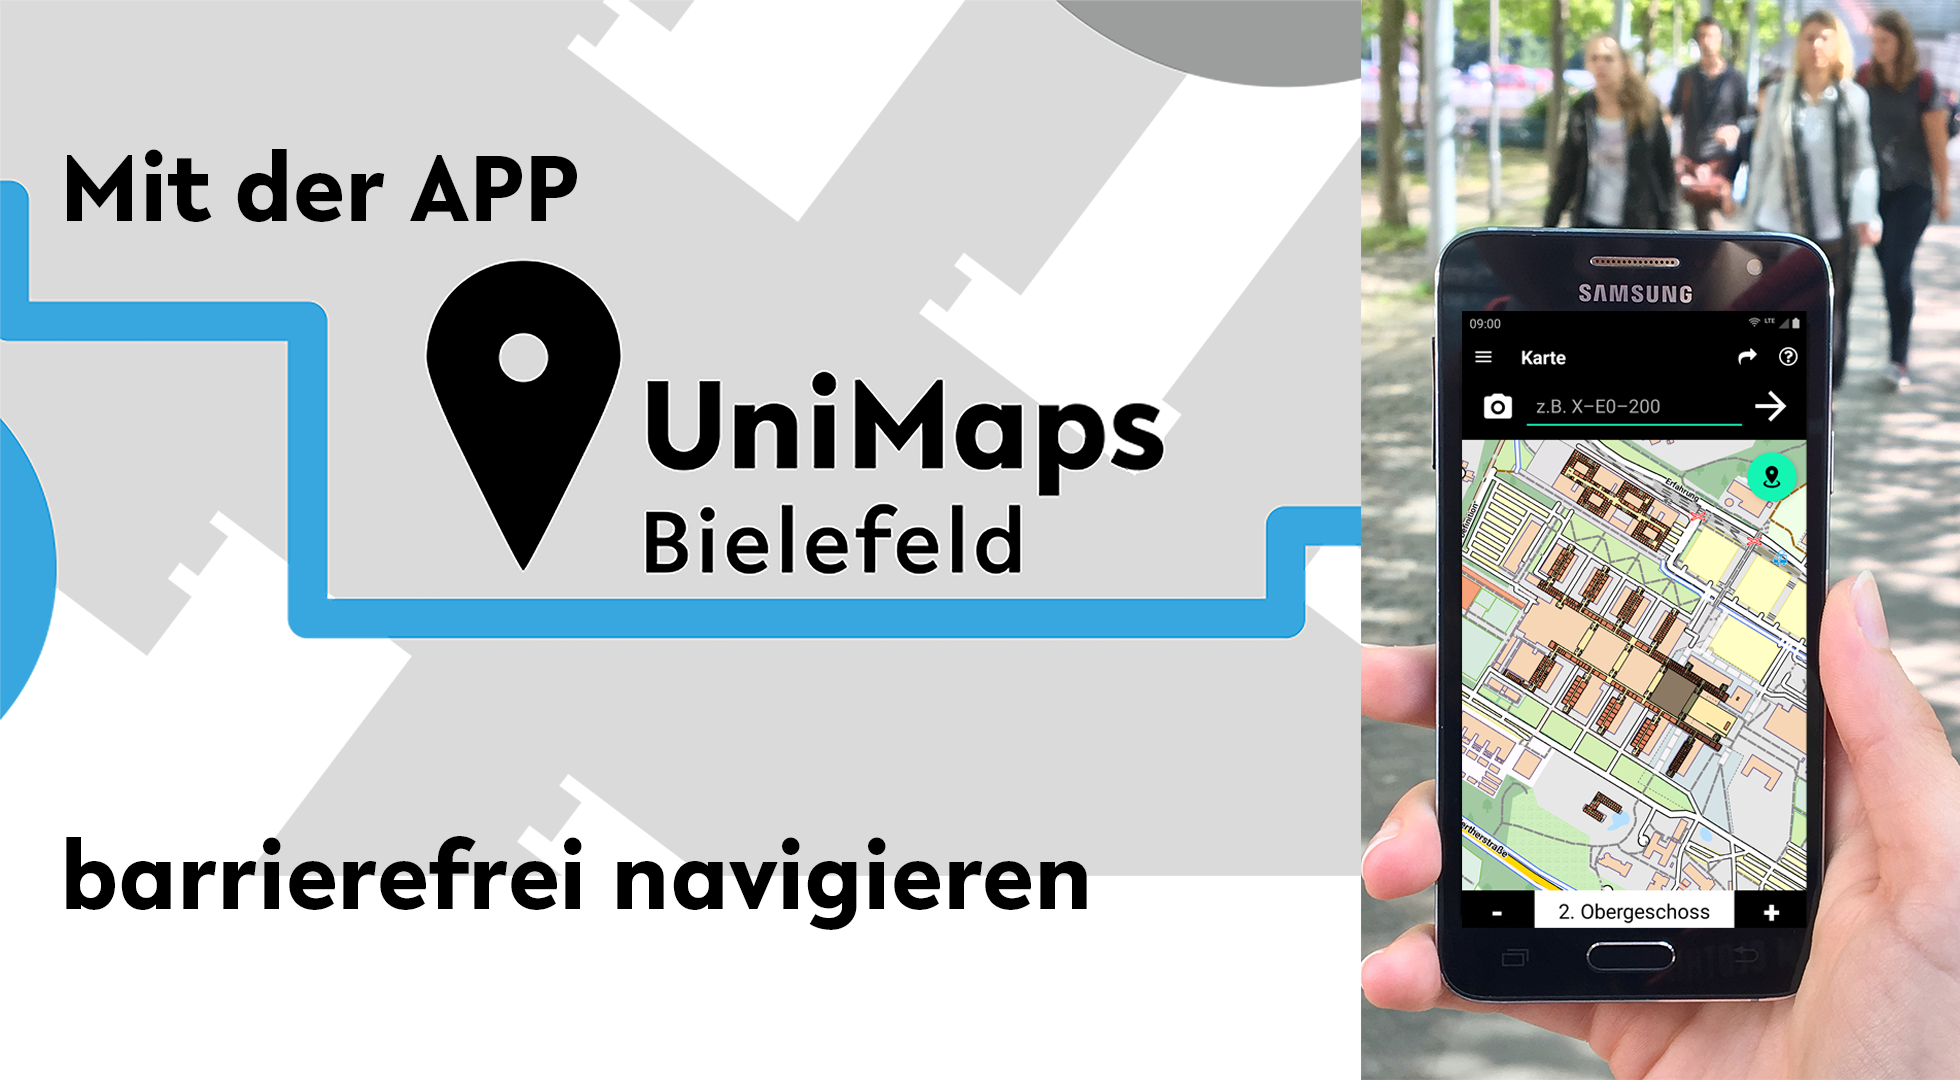 Lettering "Navigate barrier-free with the UniMaps Bielefeld app"